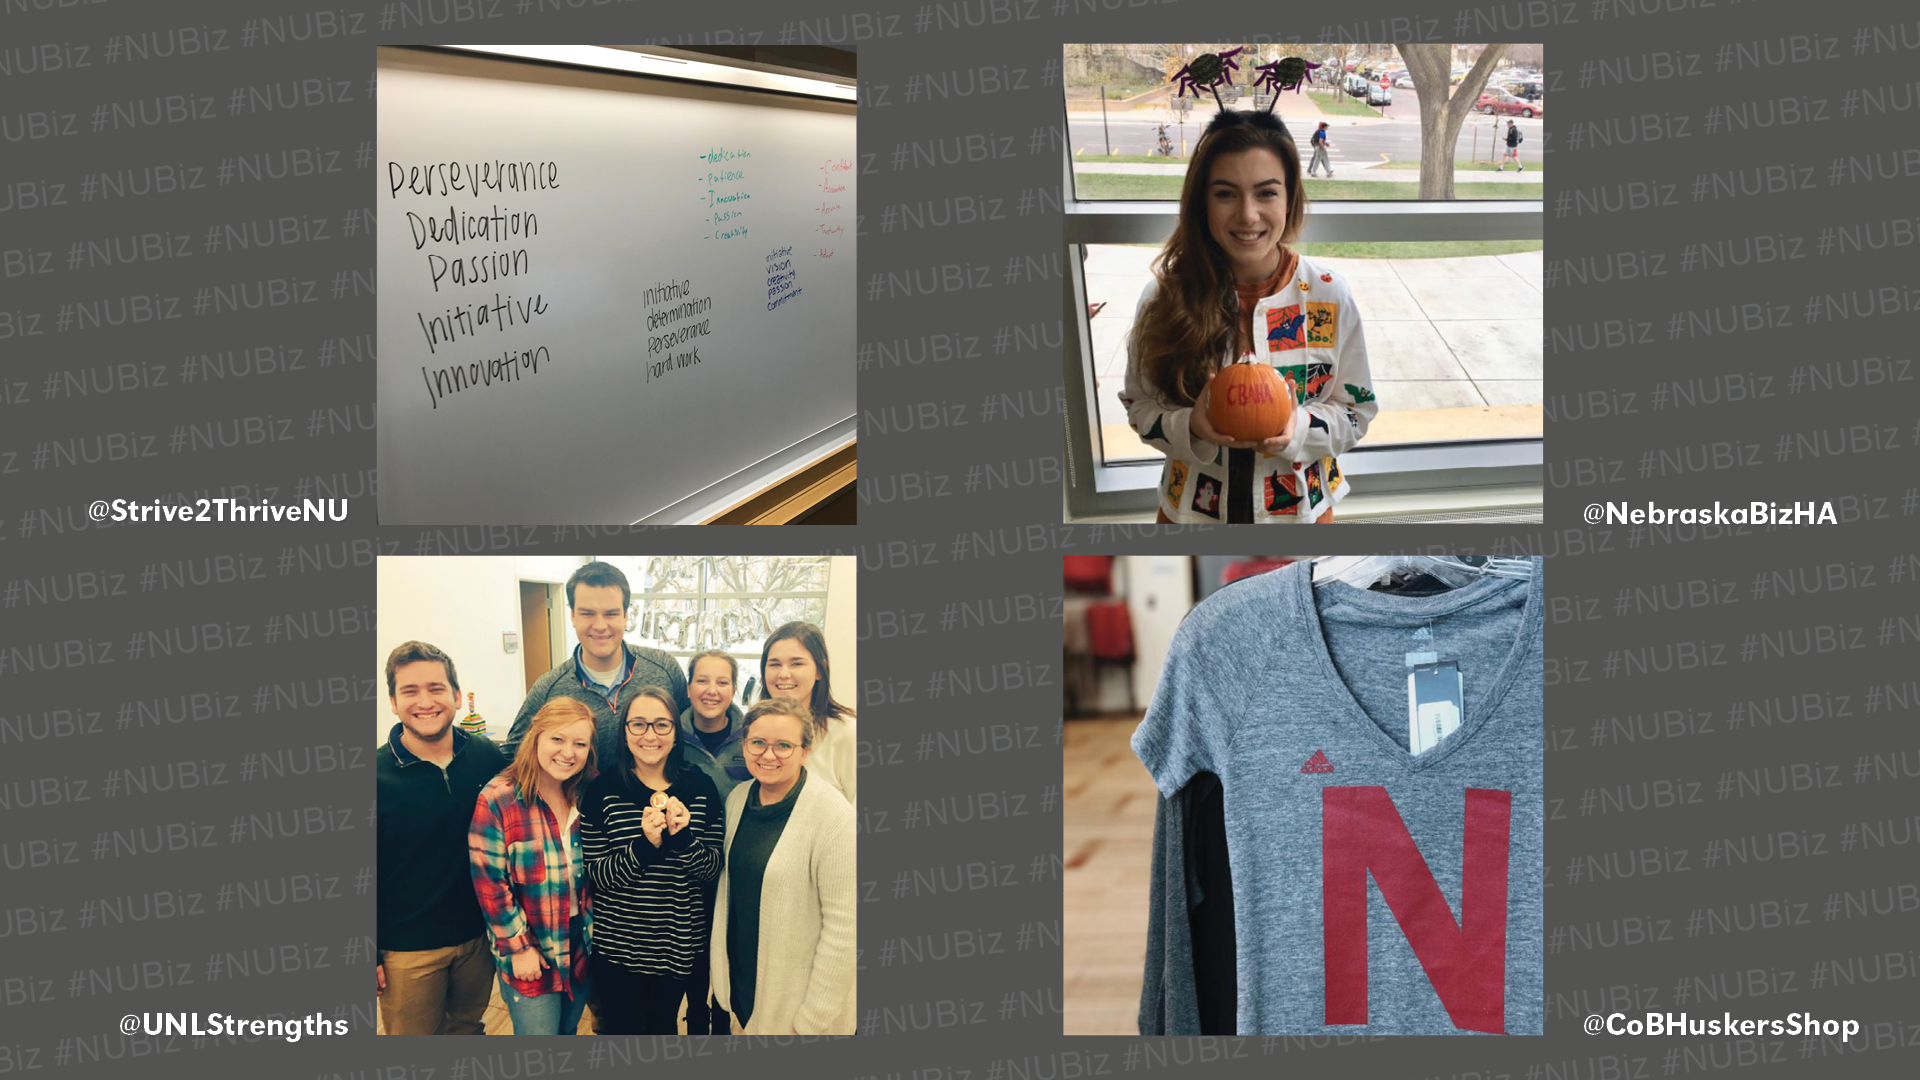 Tag your photos on Instagram and Twitter with #NUBiz to be featured next week.